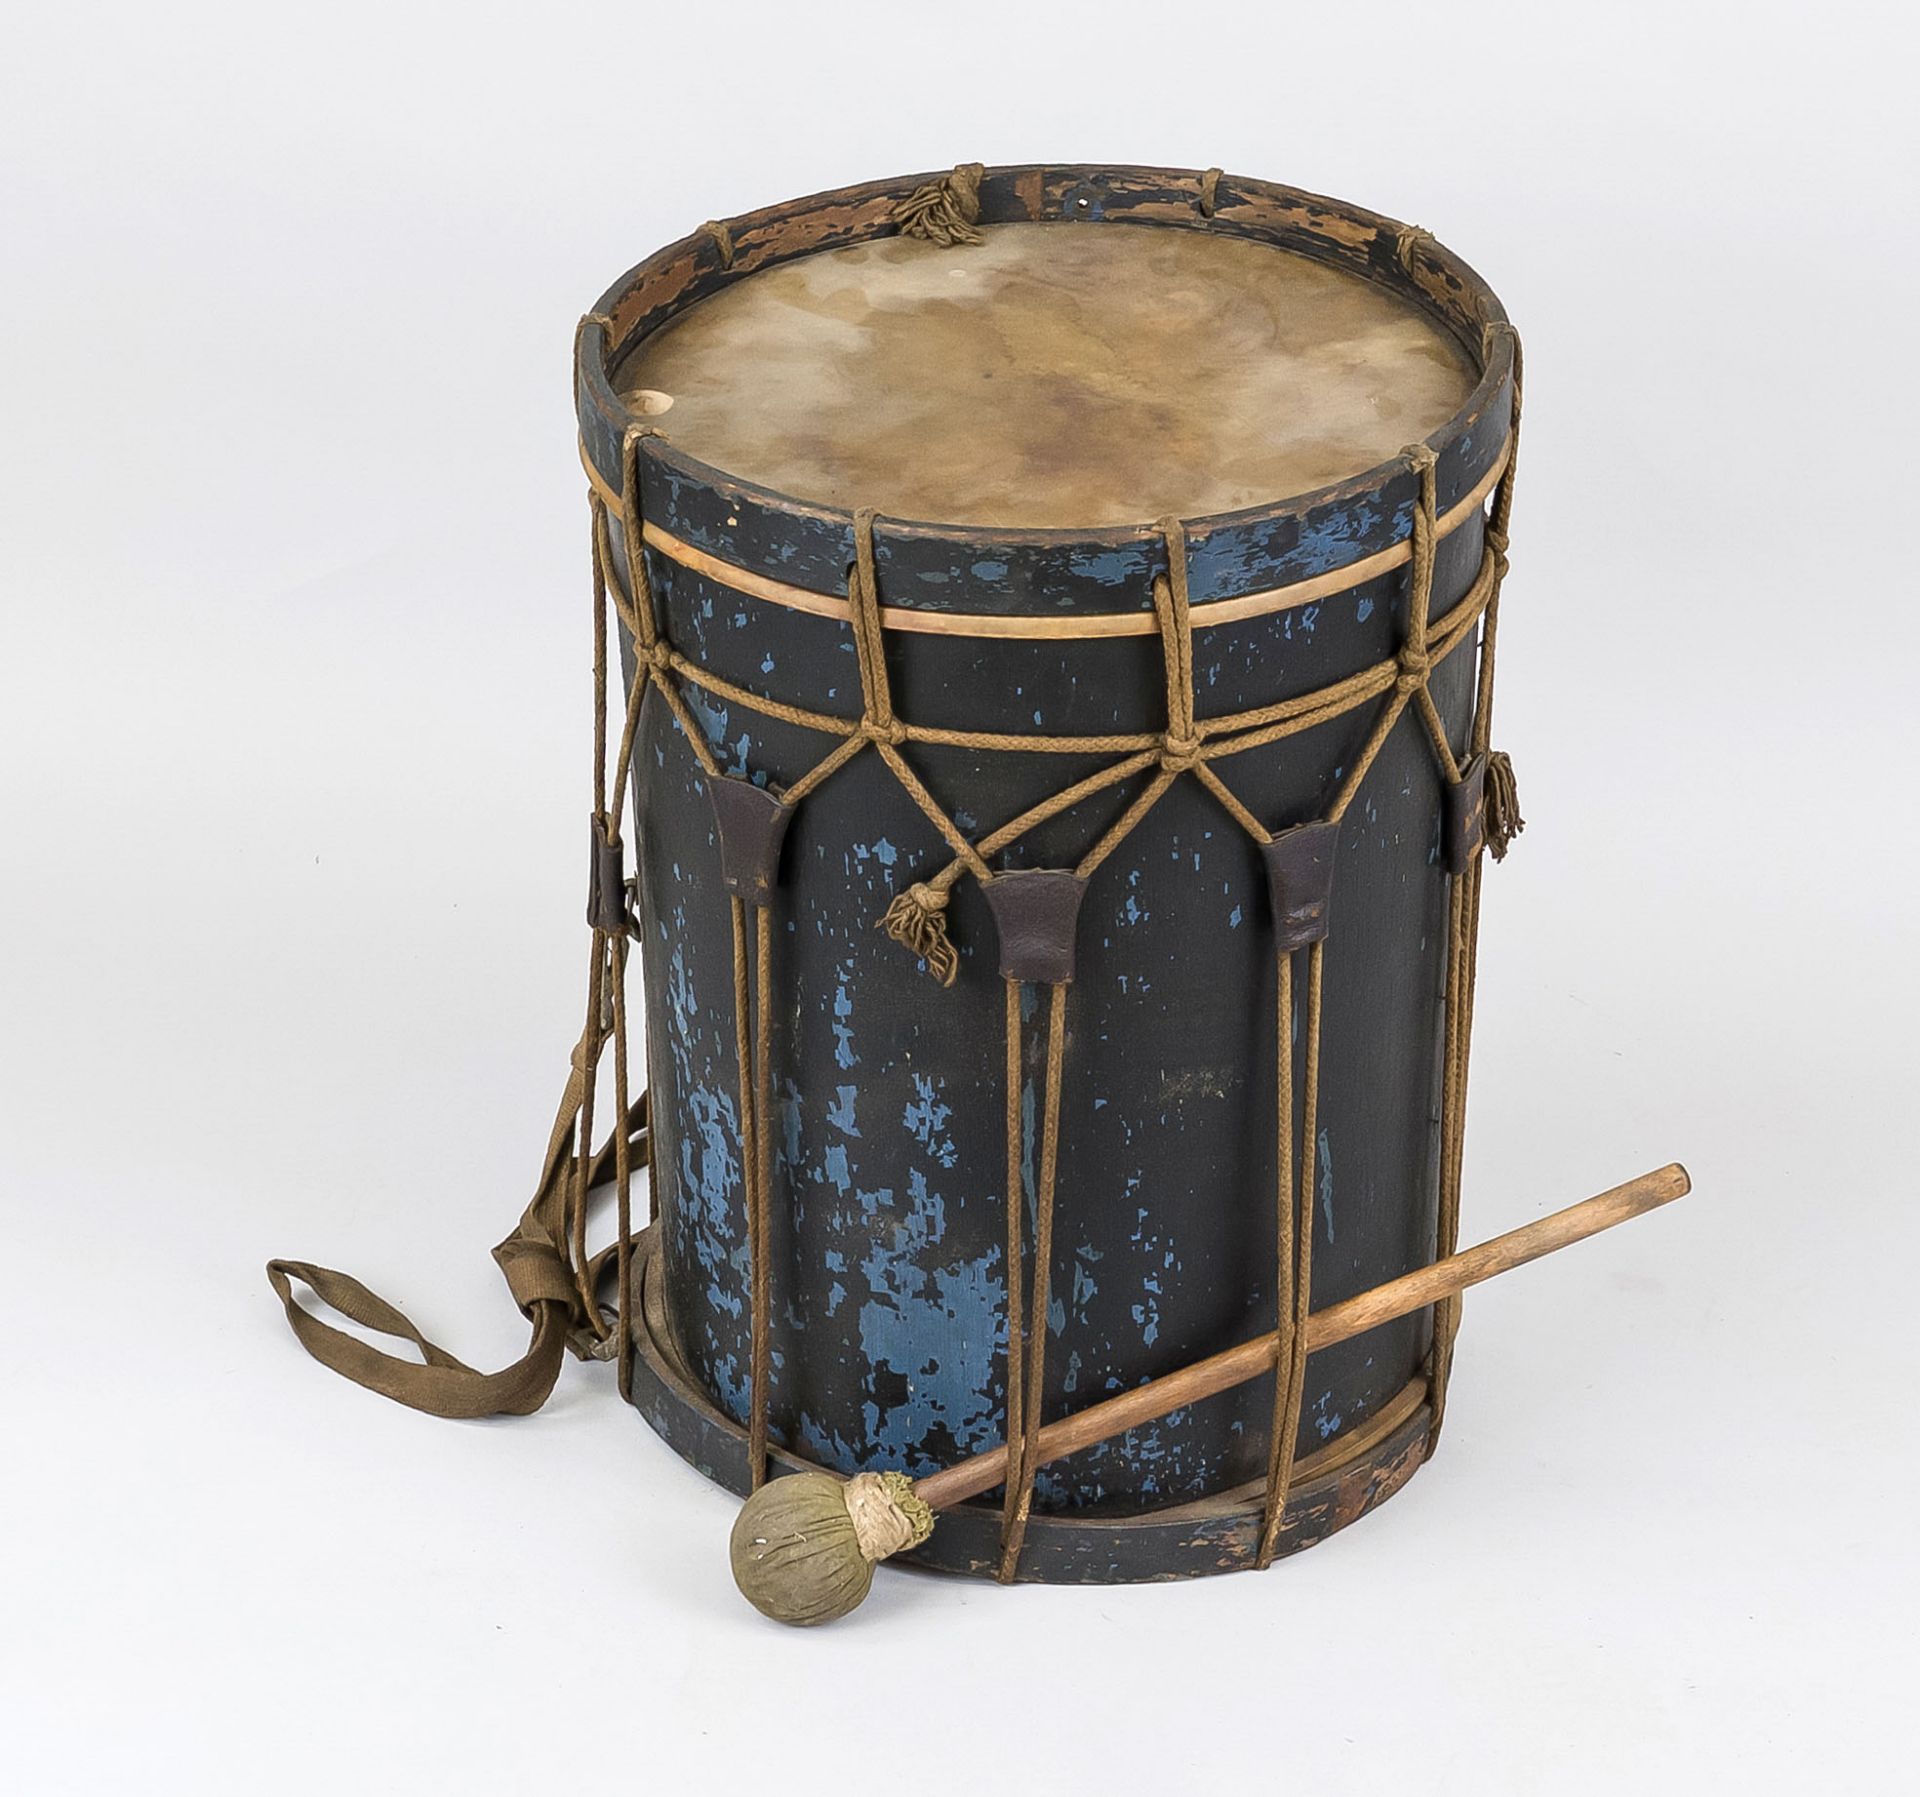 Old drum, 19th/20th century, wooden cylinder with animal skin covering on both sides with lacing,